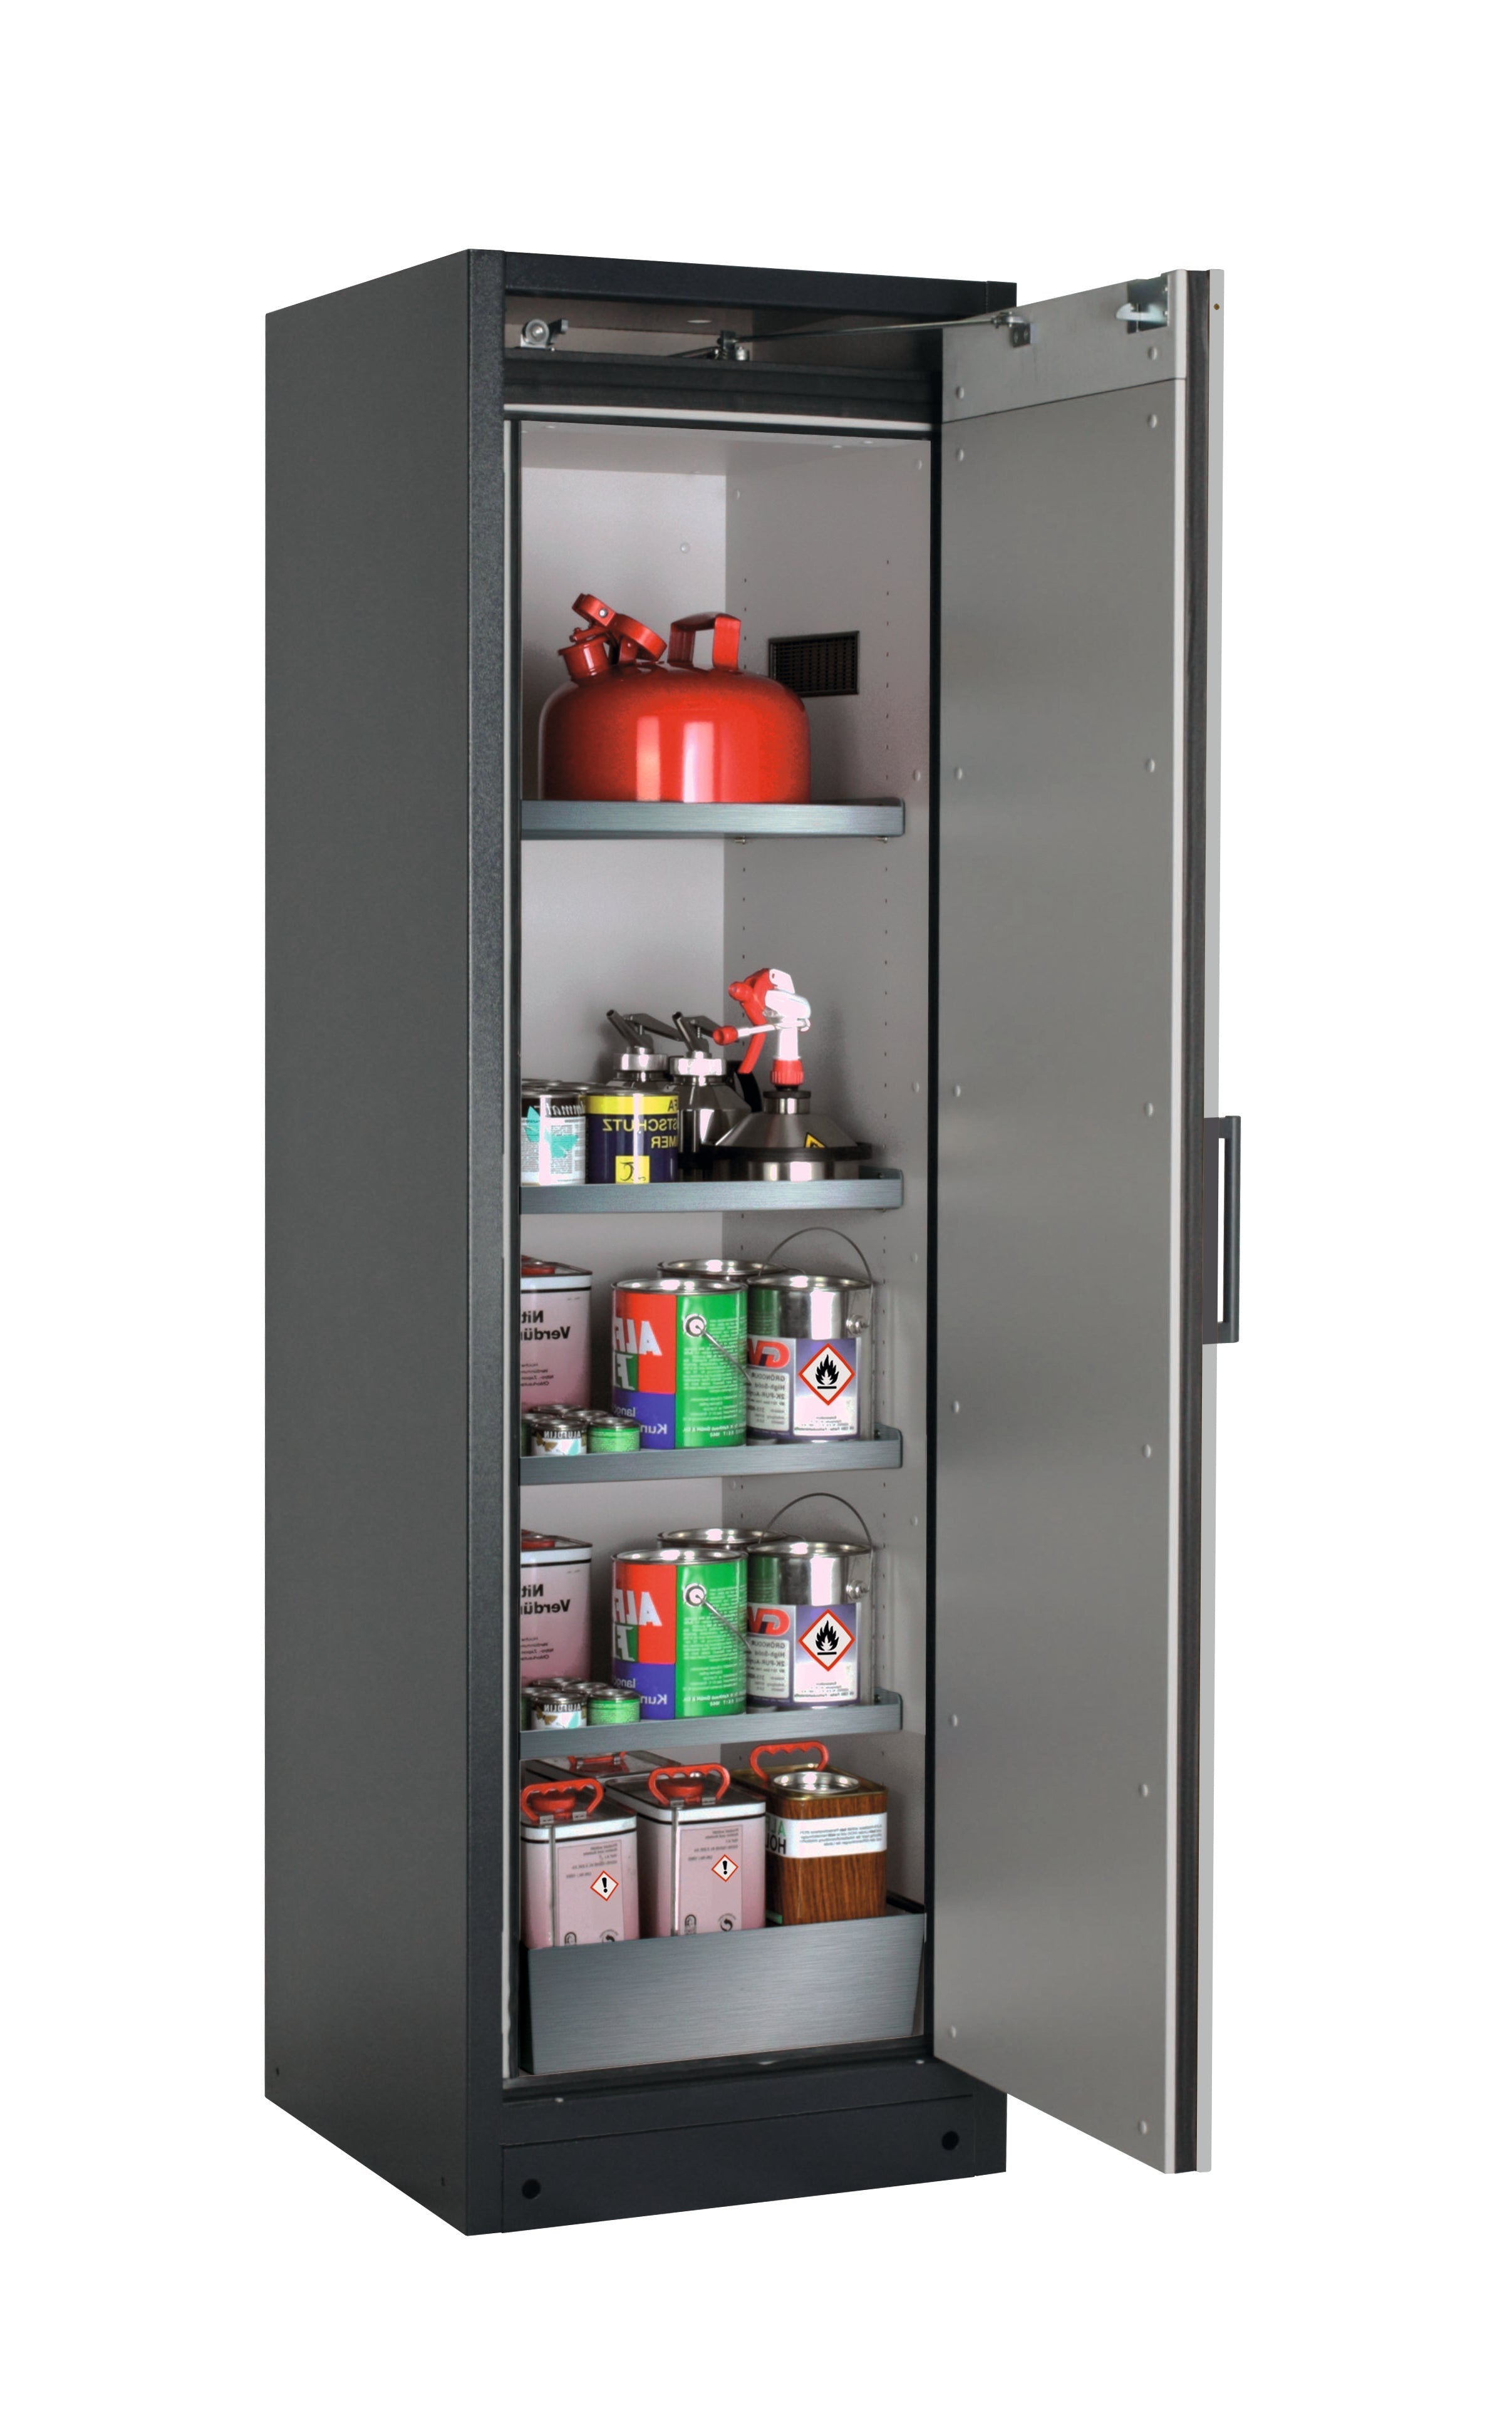 Type 90 safety storage cabinet Q-CLASSIC-90 model Q90.195.060.R in pure white RAL 9010 with 4x shelf standard (stainless steel 1.4301),